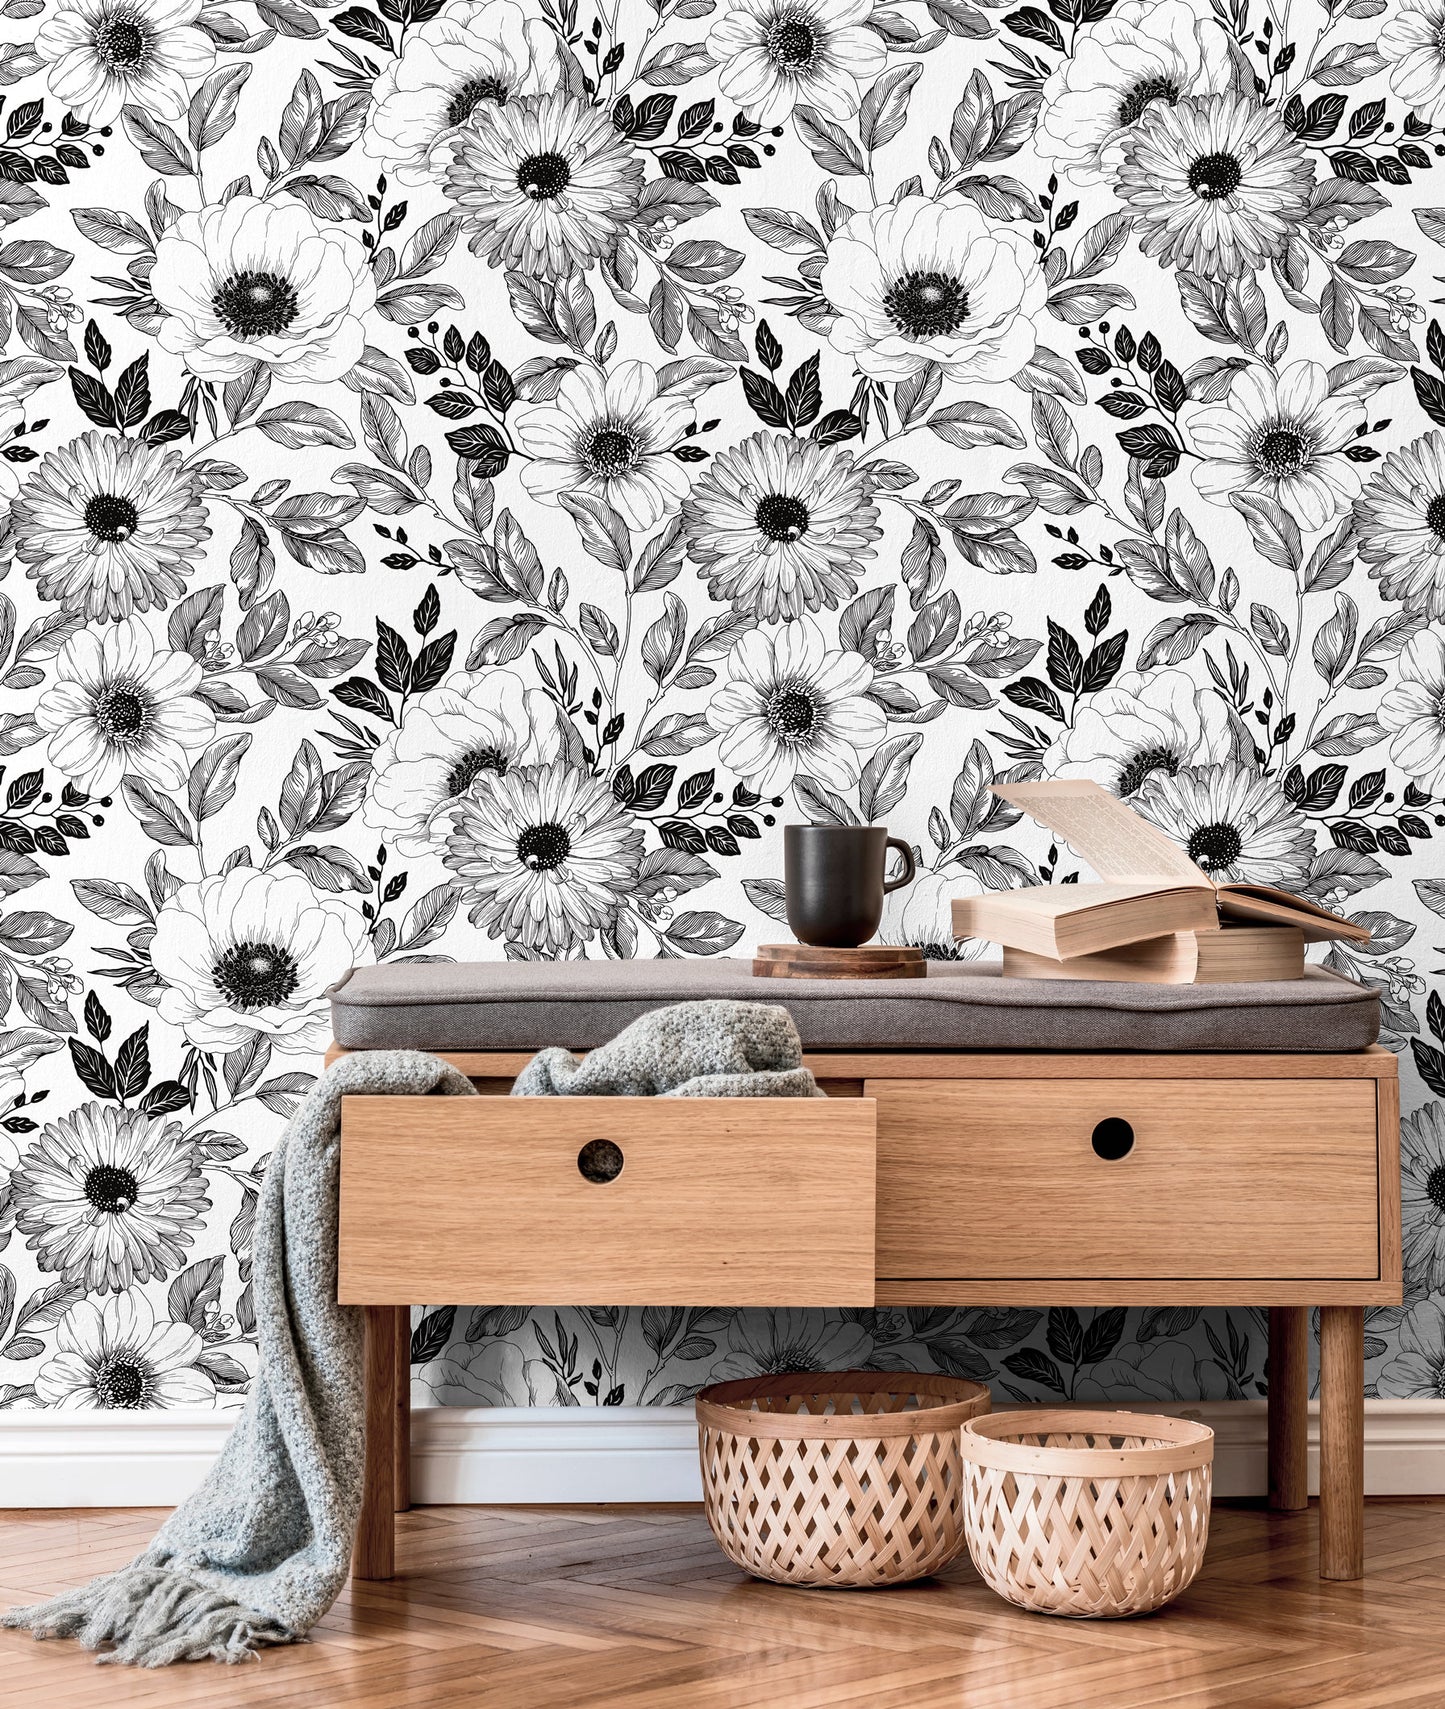 Wall Decor Wallpaper Peel and Stick Wallpaper Removable Wallpaper Home Decor Wall Art Room Decor / Black and White Floral Wallpaper - B011